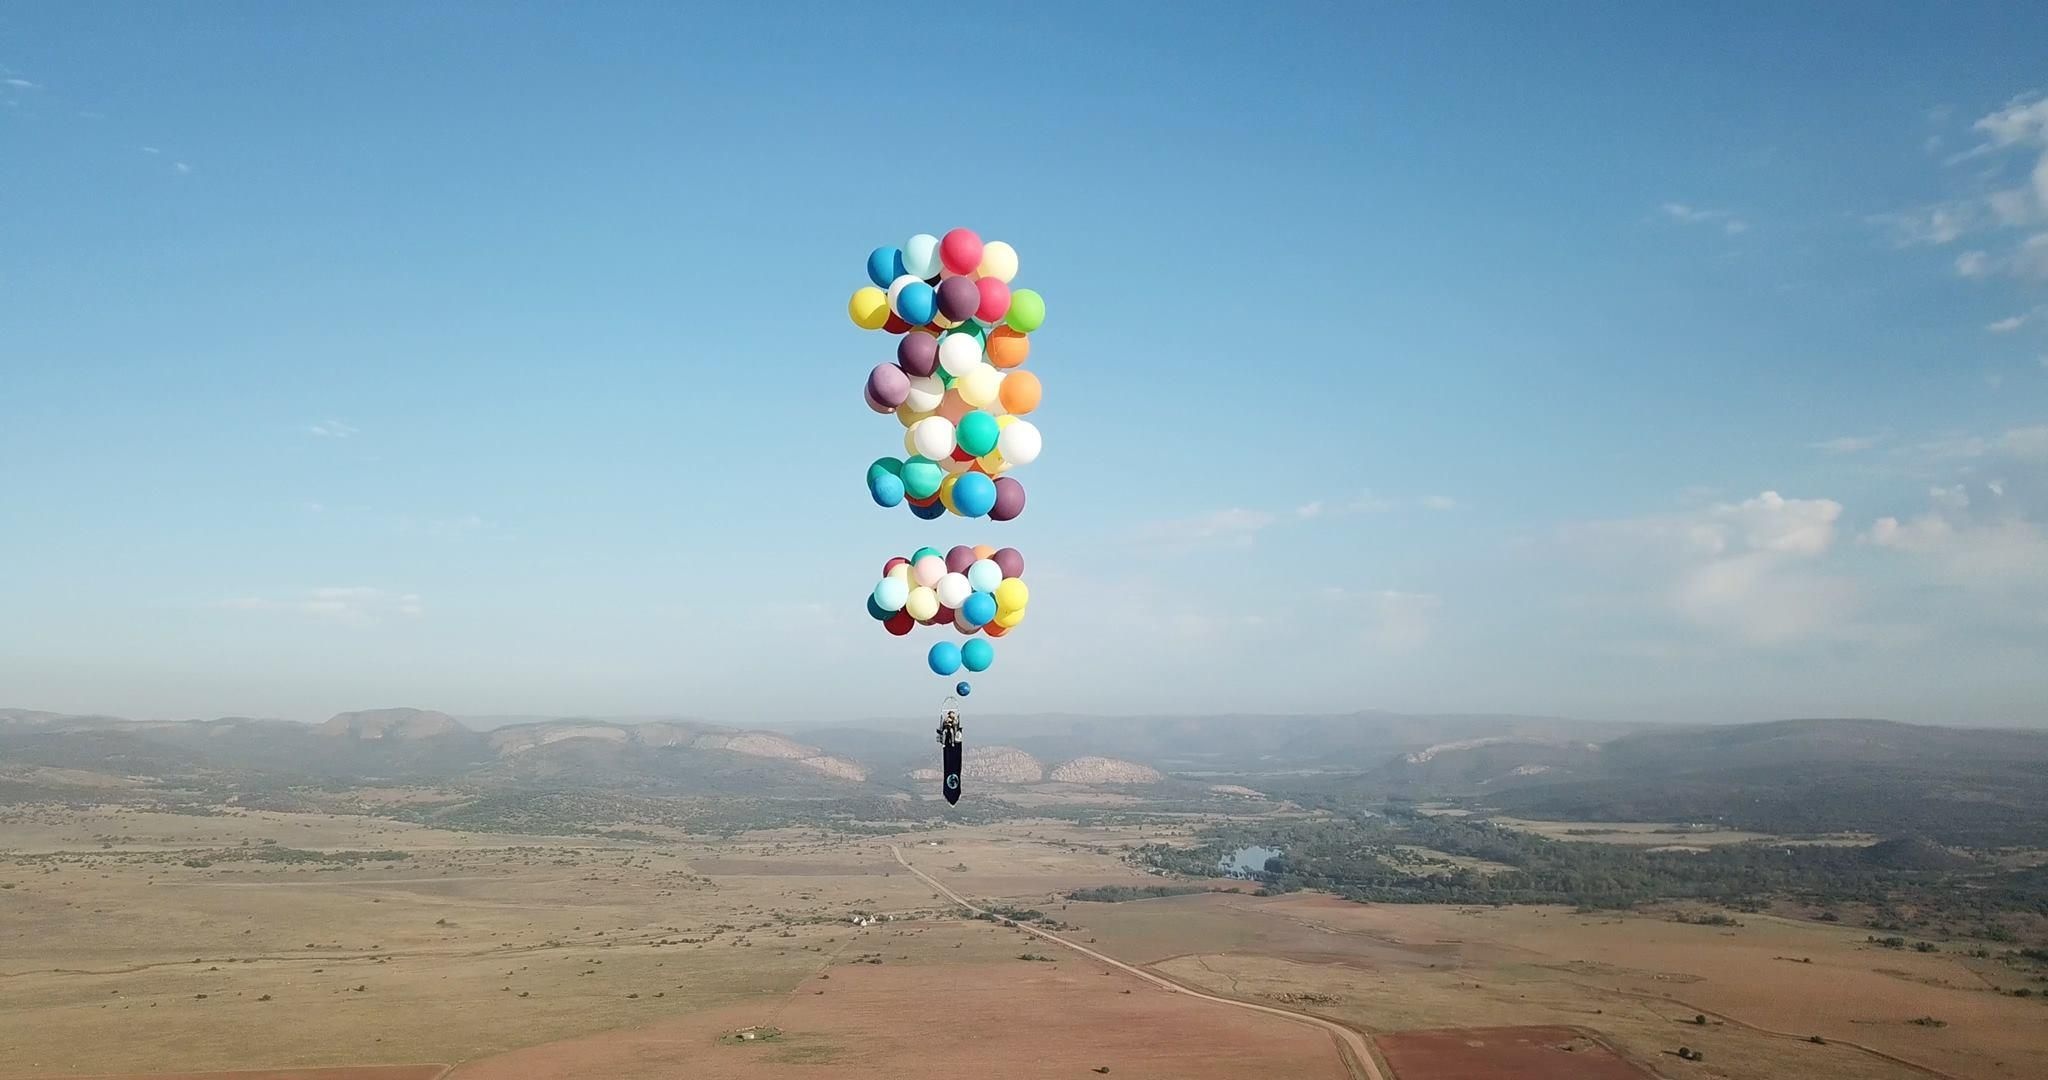 Cluster Ballooning: A flight 8,000 feet up in the air using 100 helium balloons, Tom Morgan flight across South Africa. 2050x1080 HD Background.